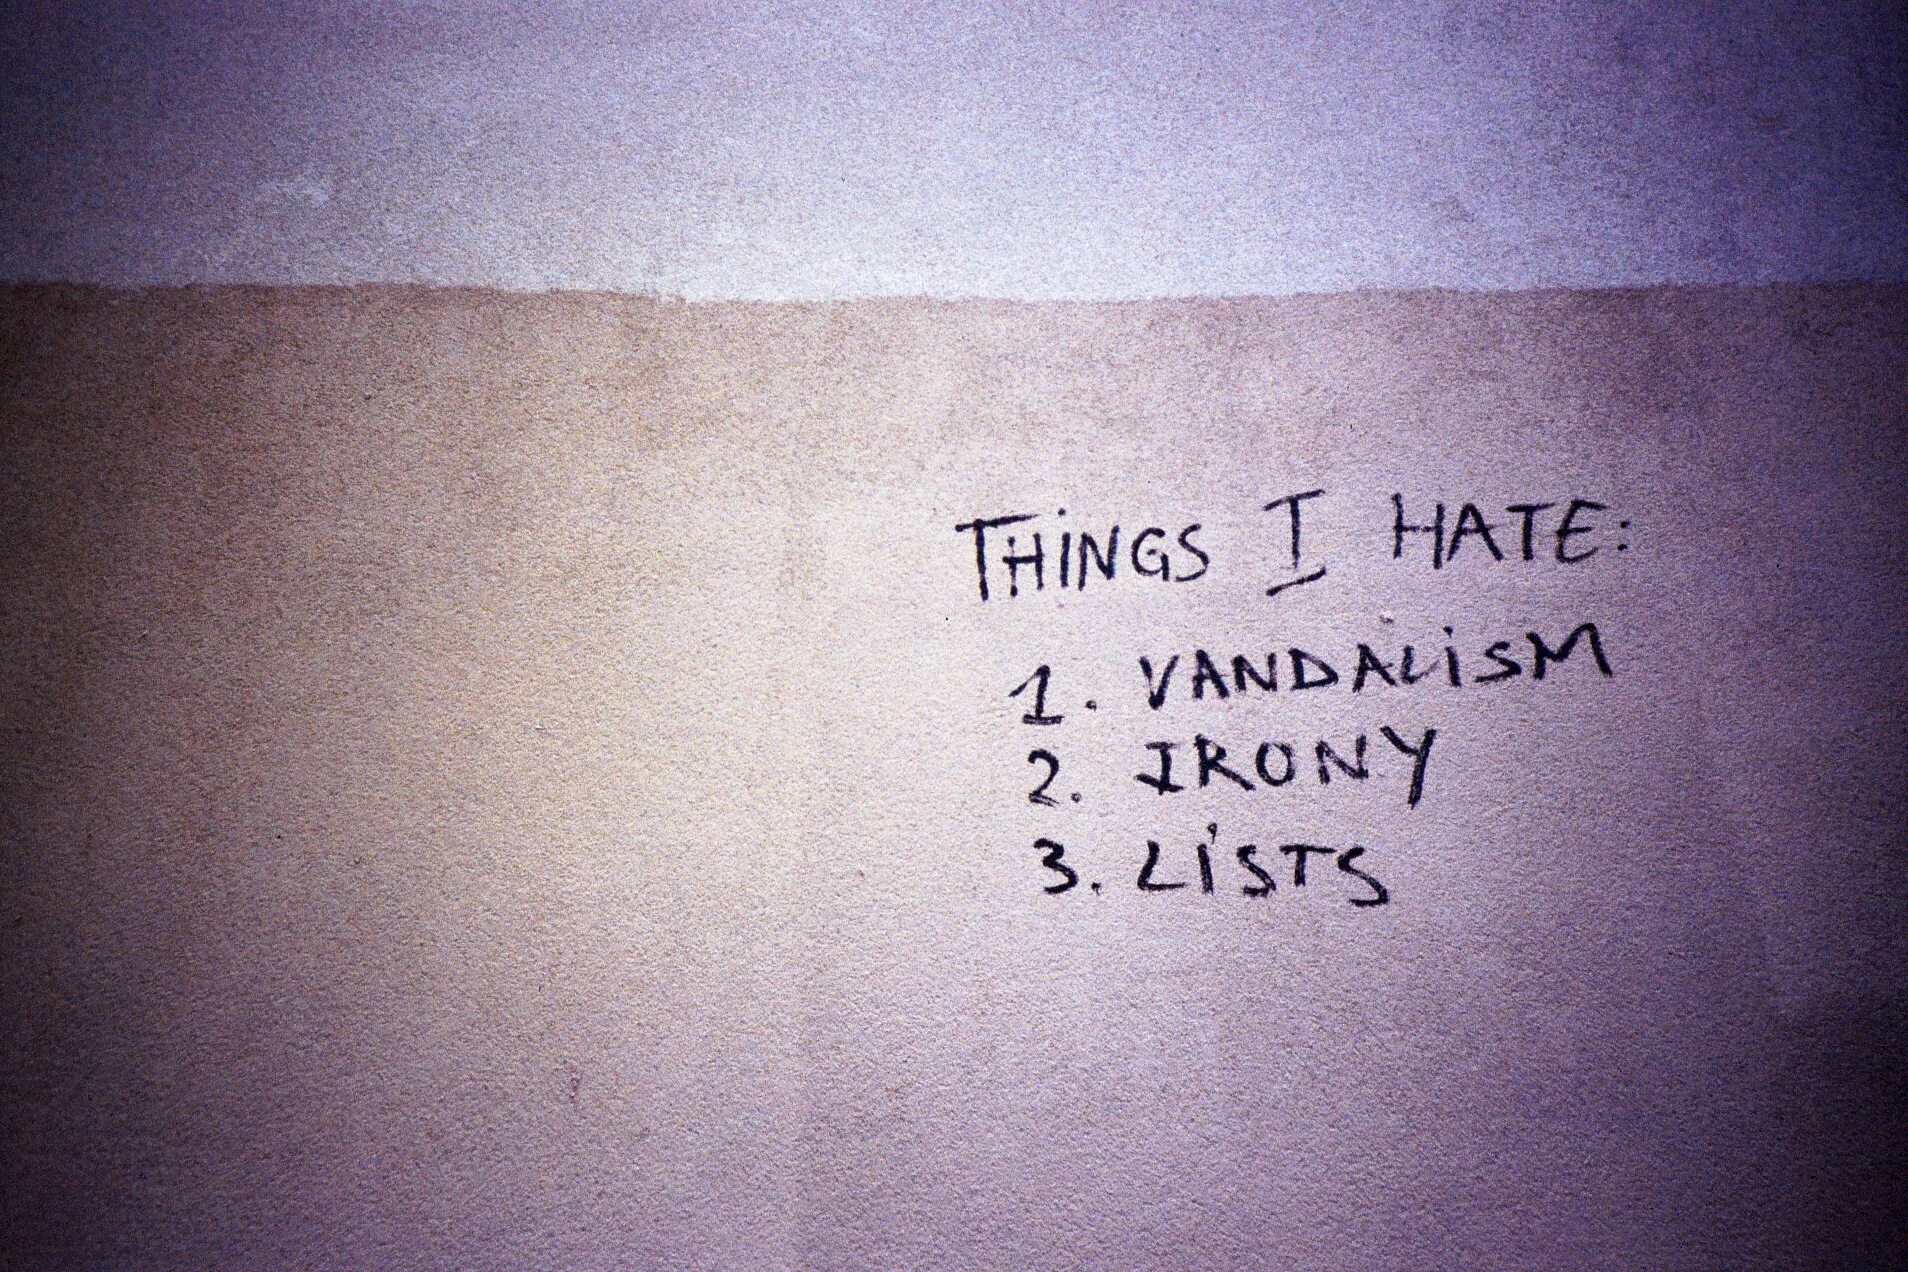 You can hate me. I hate me too обои. Hate обои. Hate me hate me. Надпись i hate you.